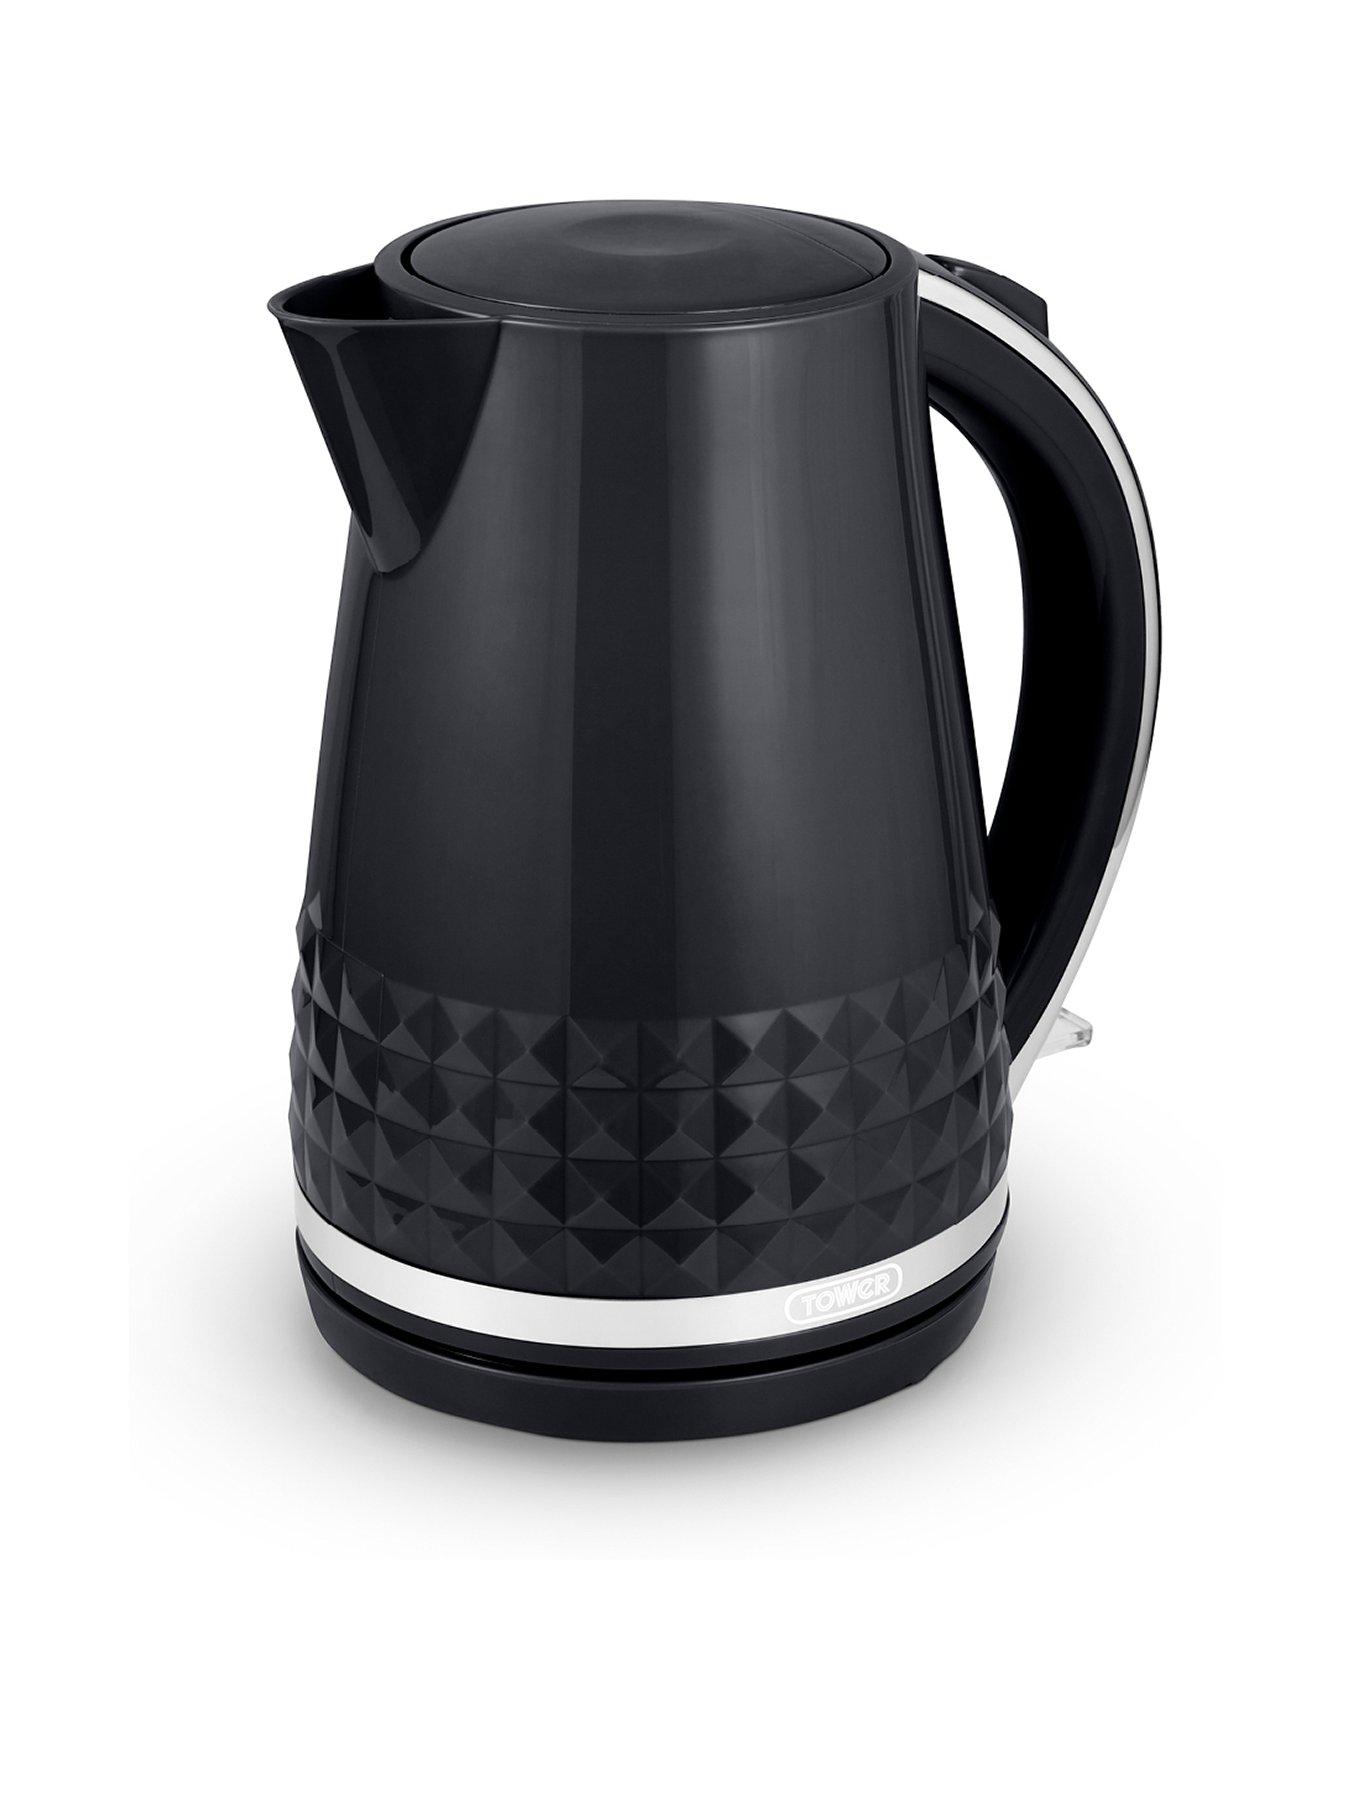 https://media.very.ie/i/littlewoodsireland/VQ4RP_SQ1_0000000088_NO_COLOR_SLf/tower-t10075blk-solitaire-kettle-with-360deg-swivel-base-cord-storage-15l-3kw-black-and-chrome-accents.jpg?$180x240_retinamobilex2$